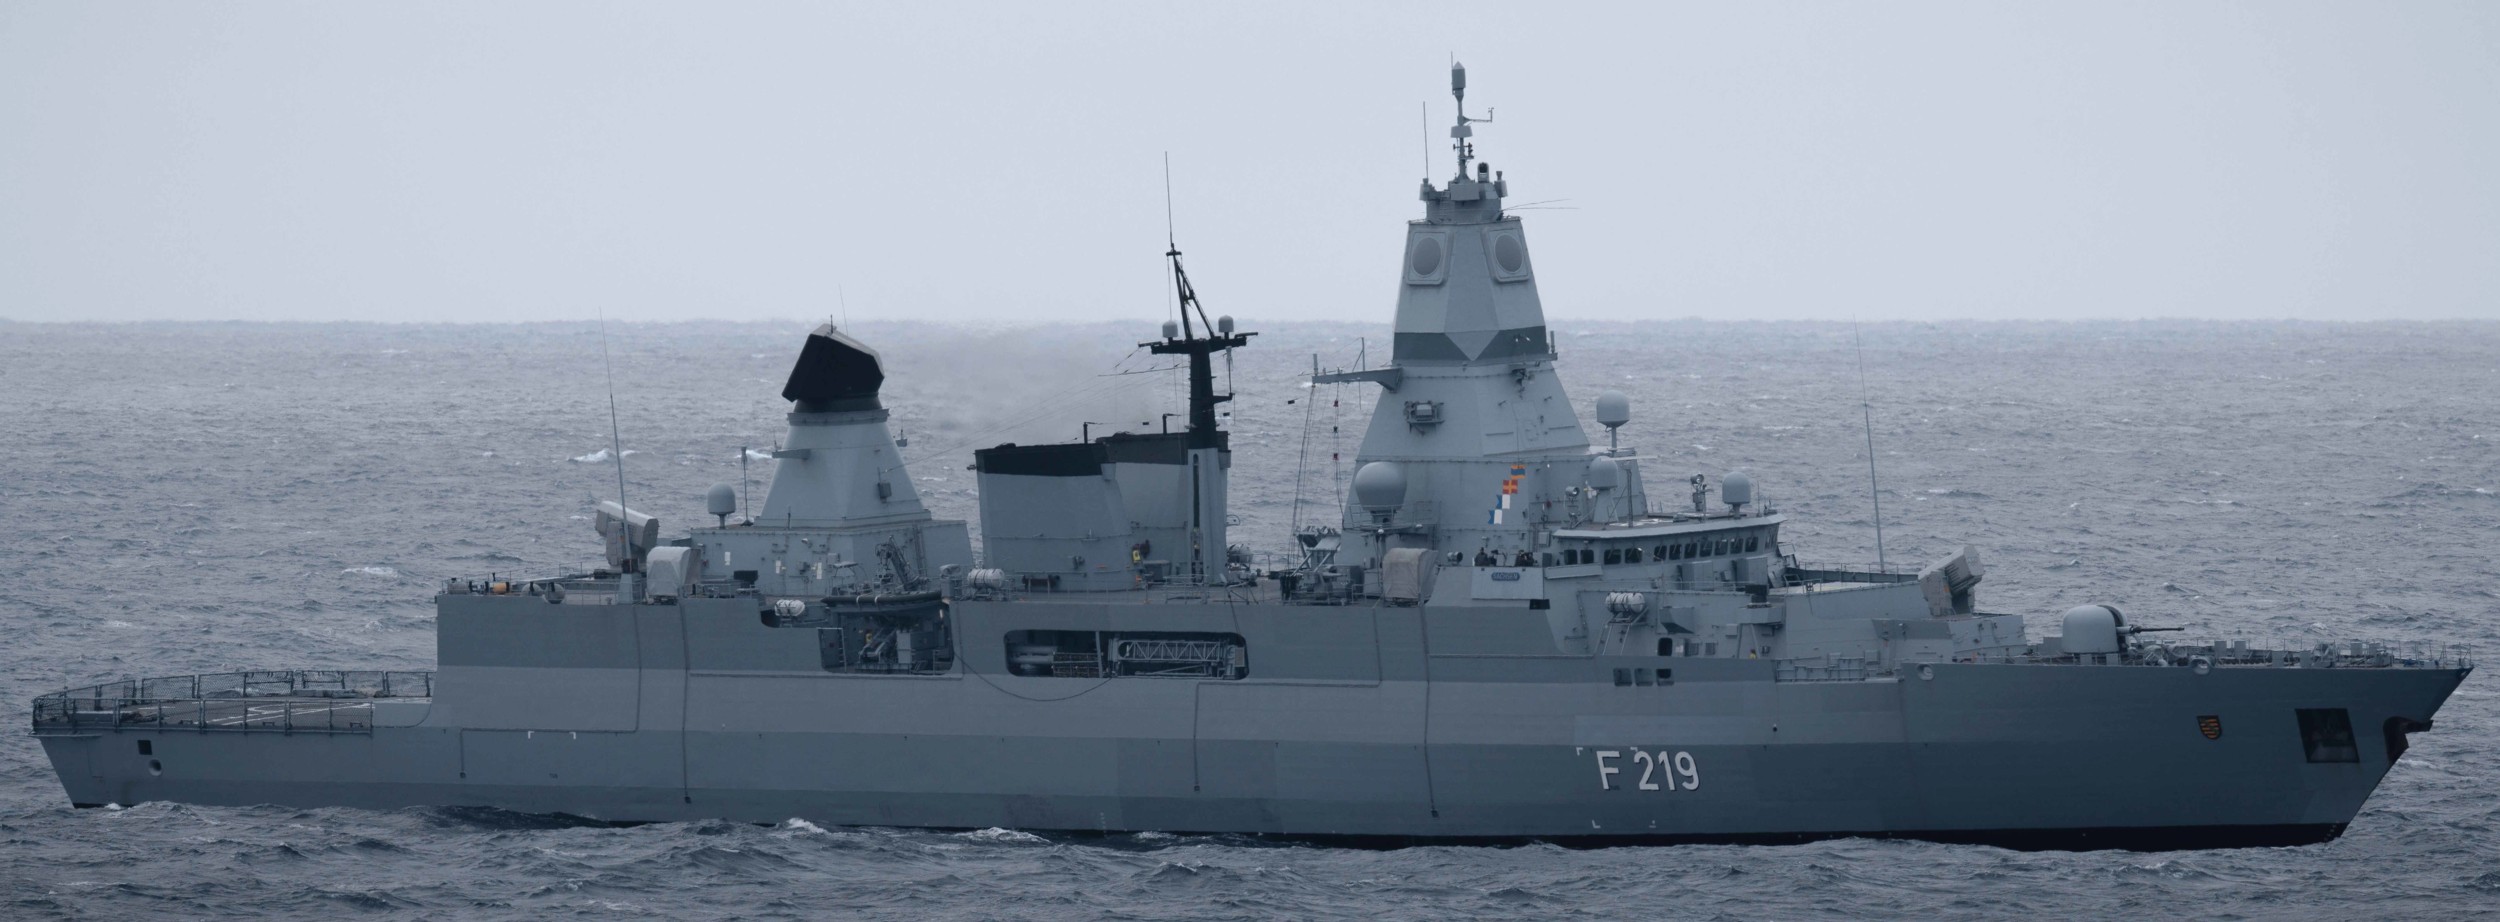 f-219 fgs sachsen type 124 class guided missile frigate ffg german navy marine fregatte 43